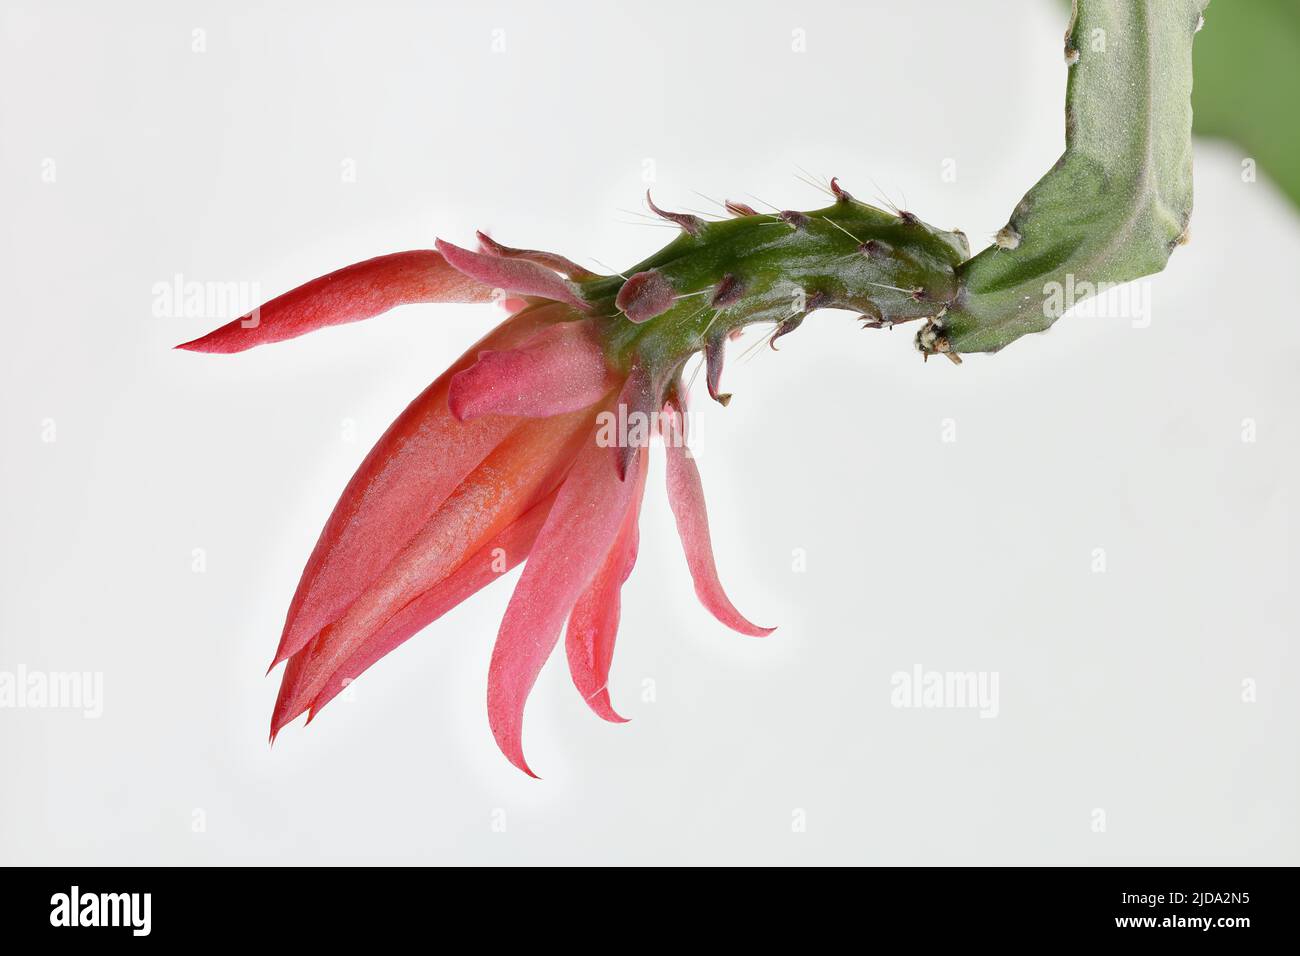 Result of focus stacking of bloom of Disocactus Ackermannii Stock Photo